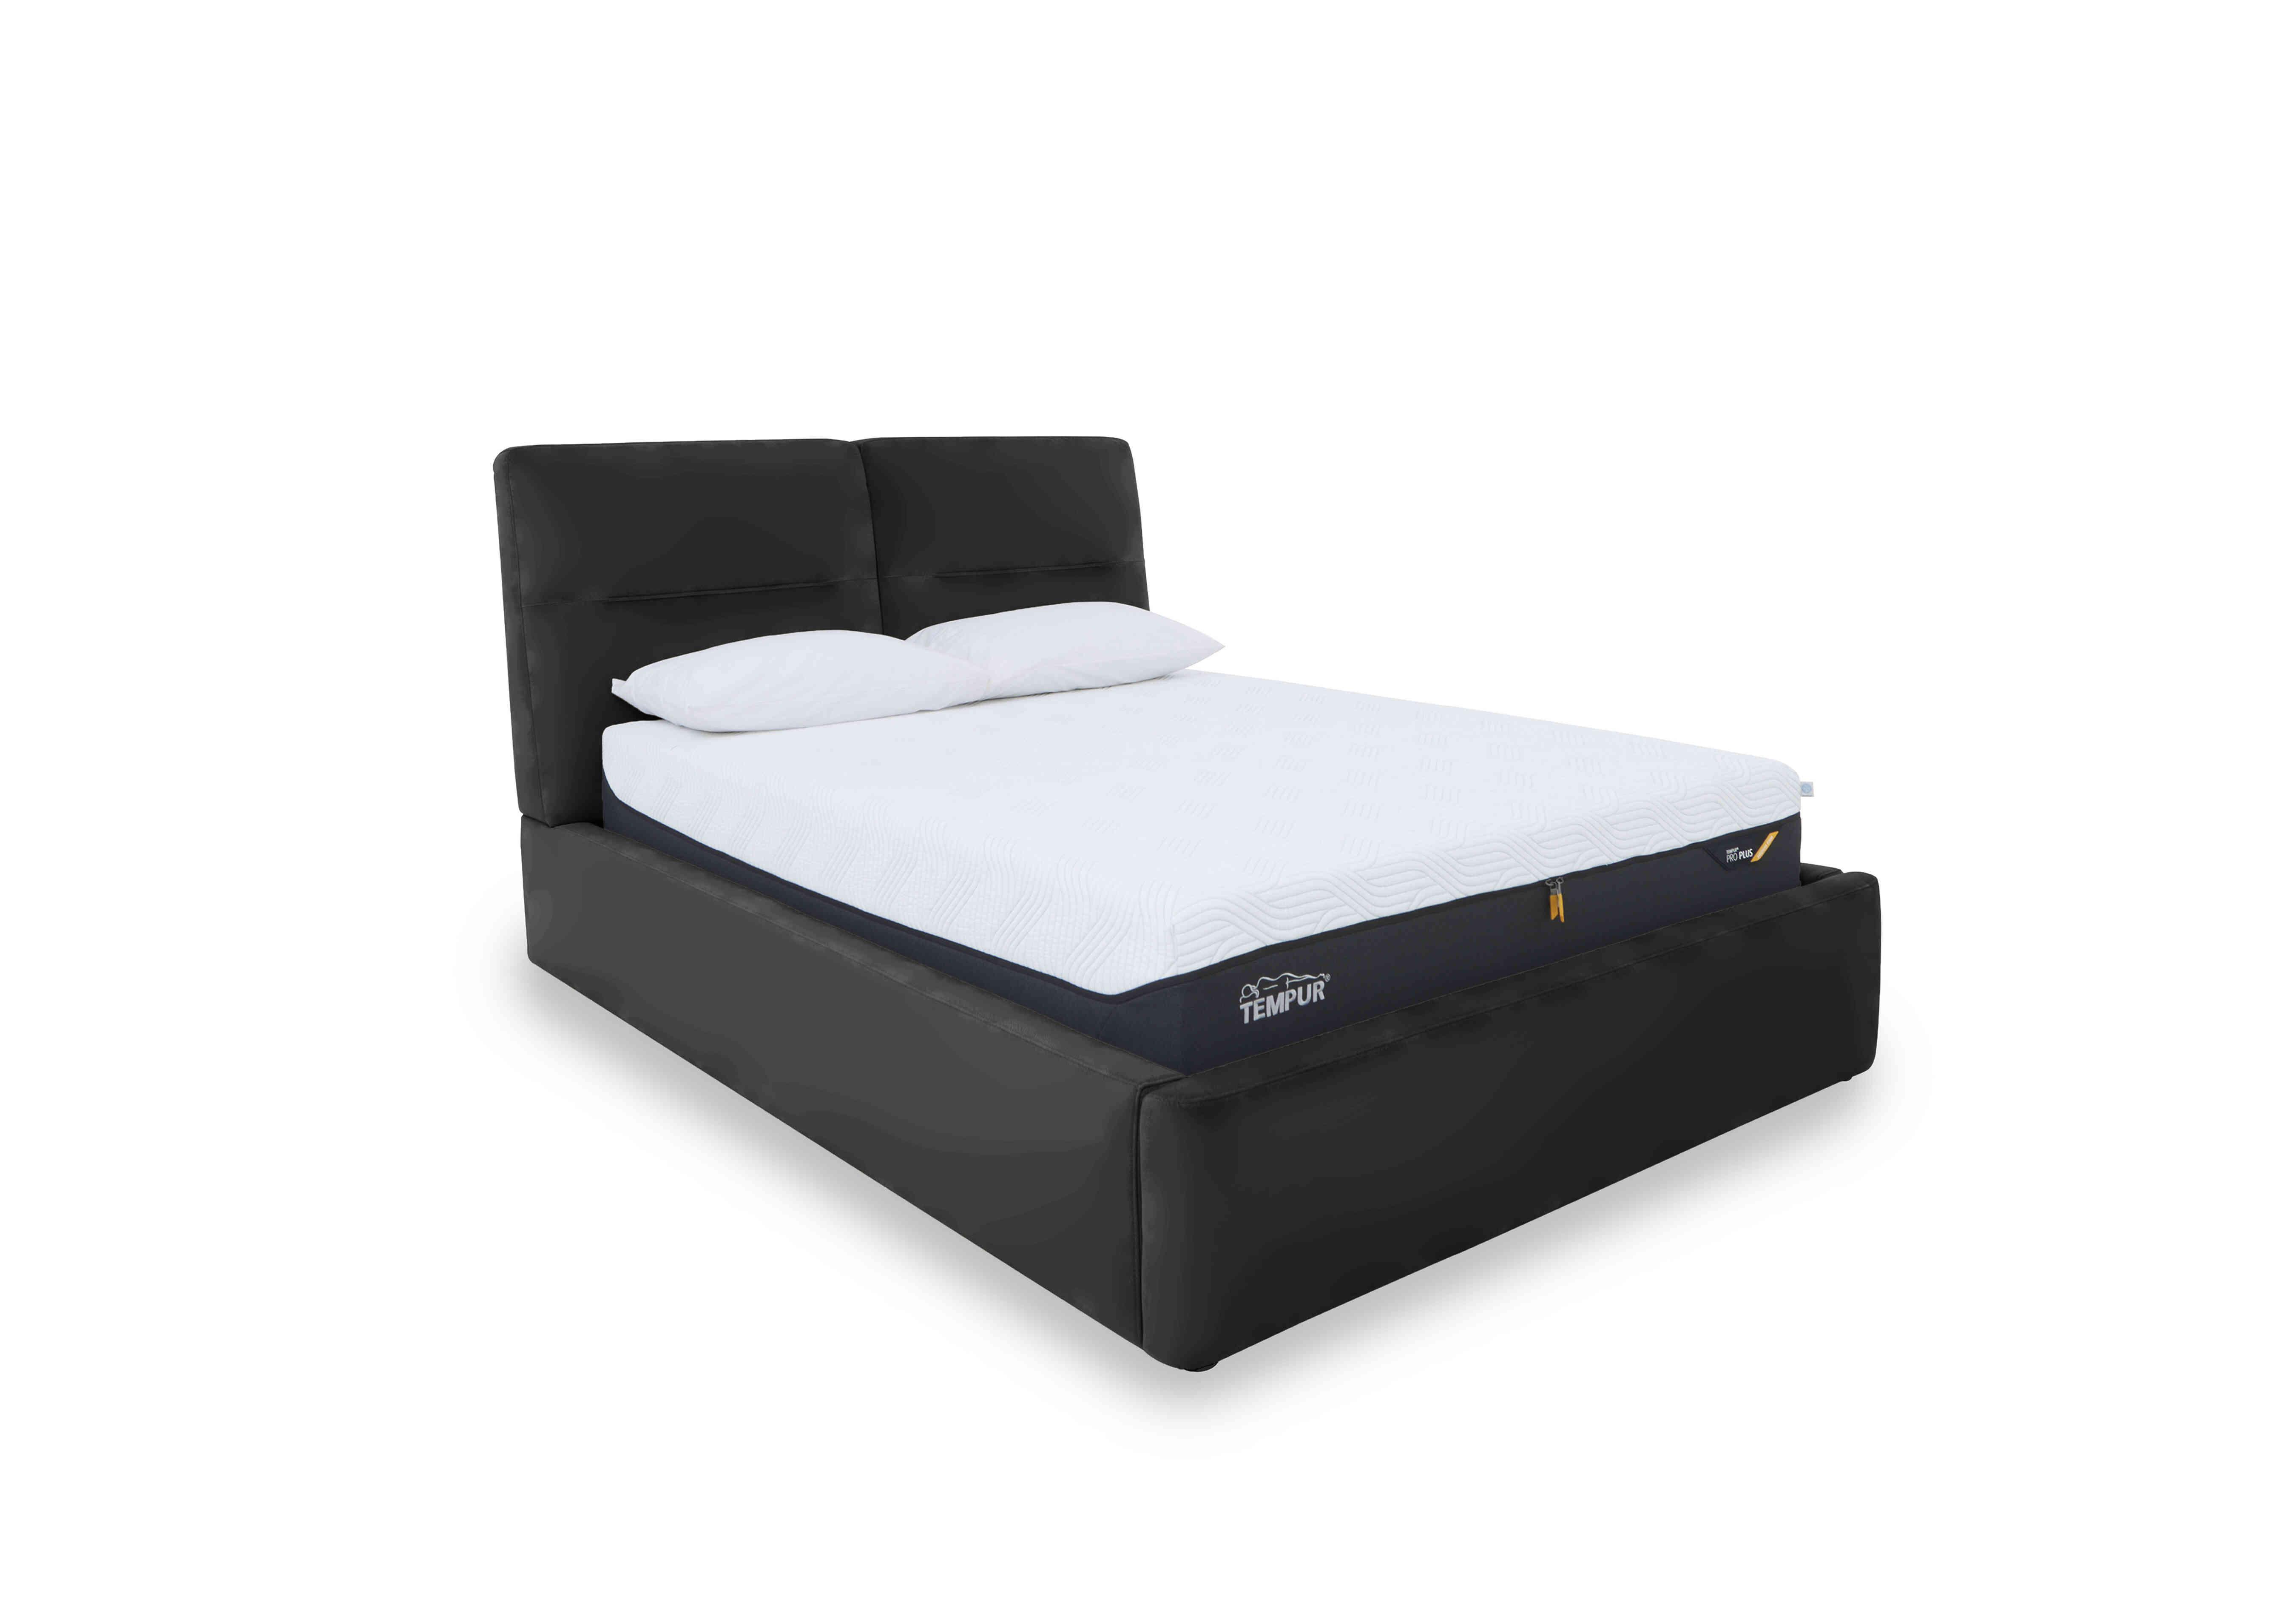 Stark Leather Manual Ottoman Bed Frame in Bv-3500 Classic Black on Furniture Village